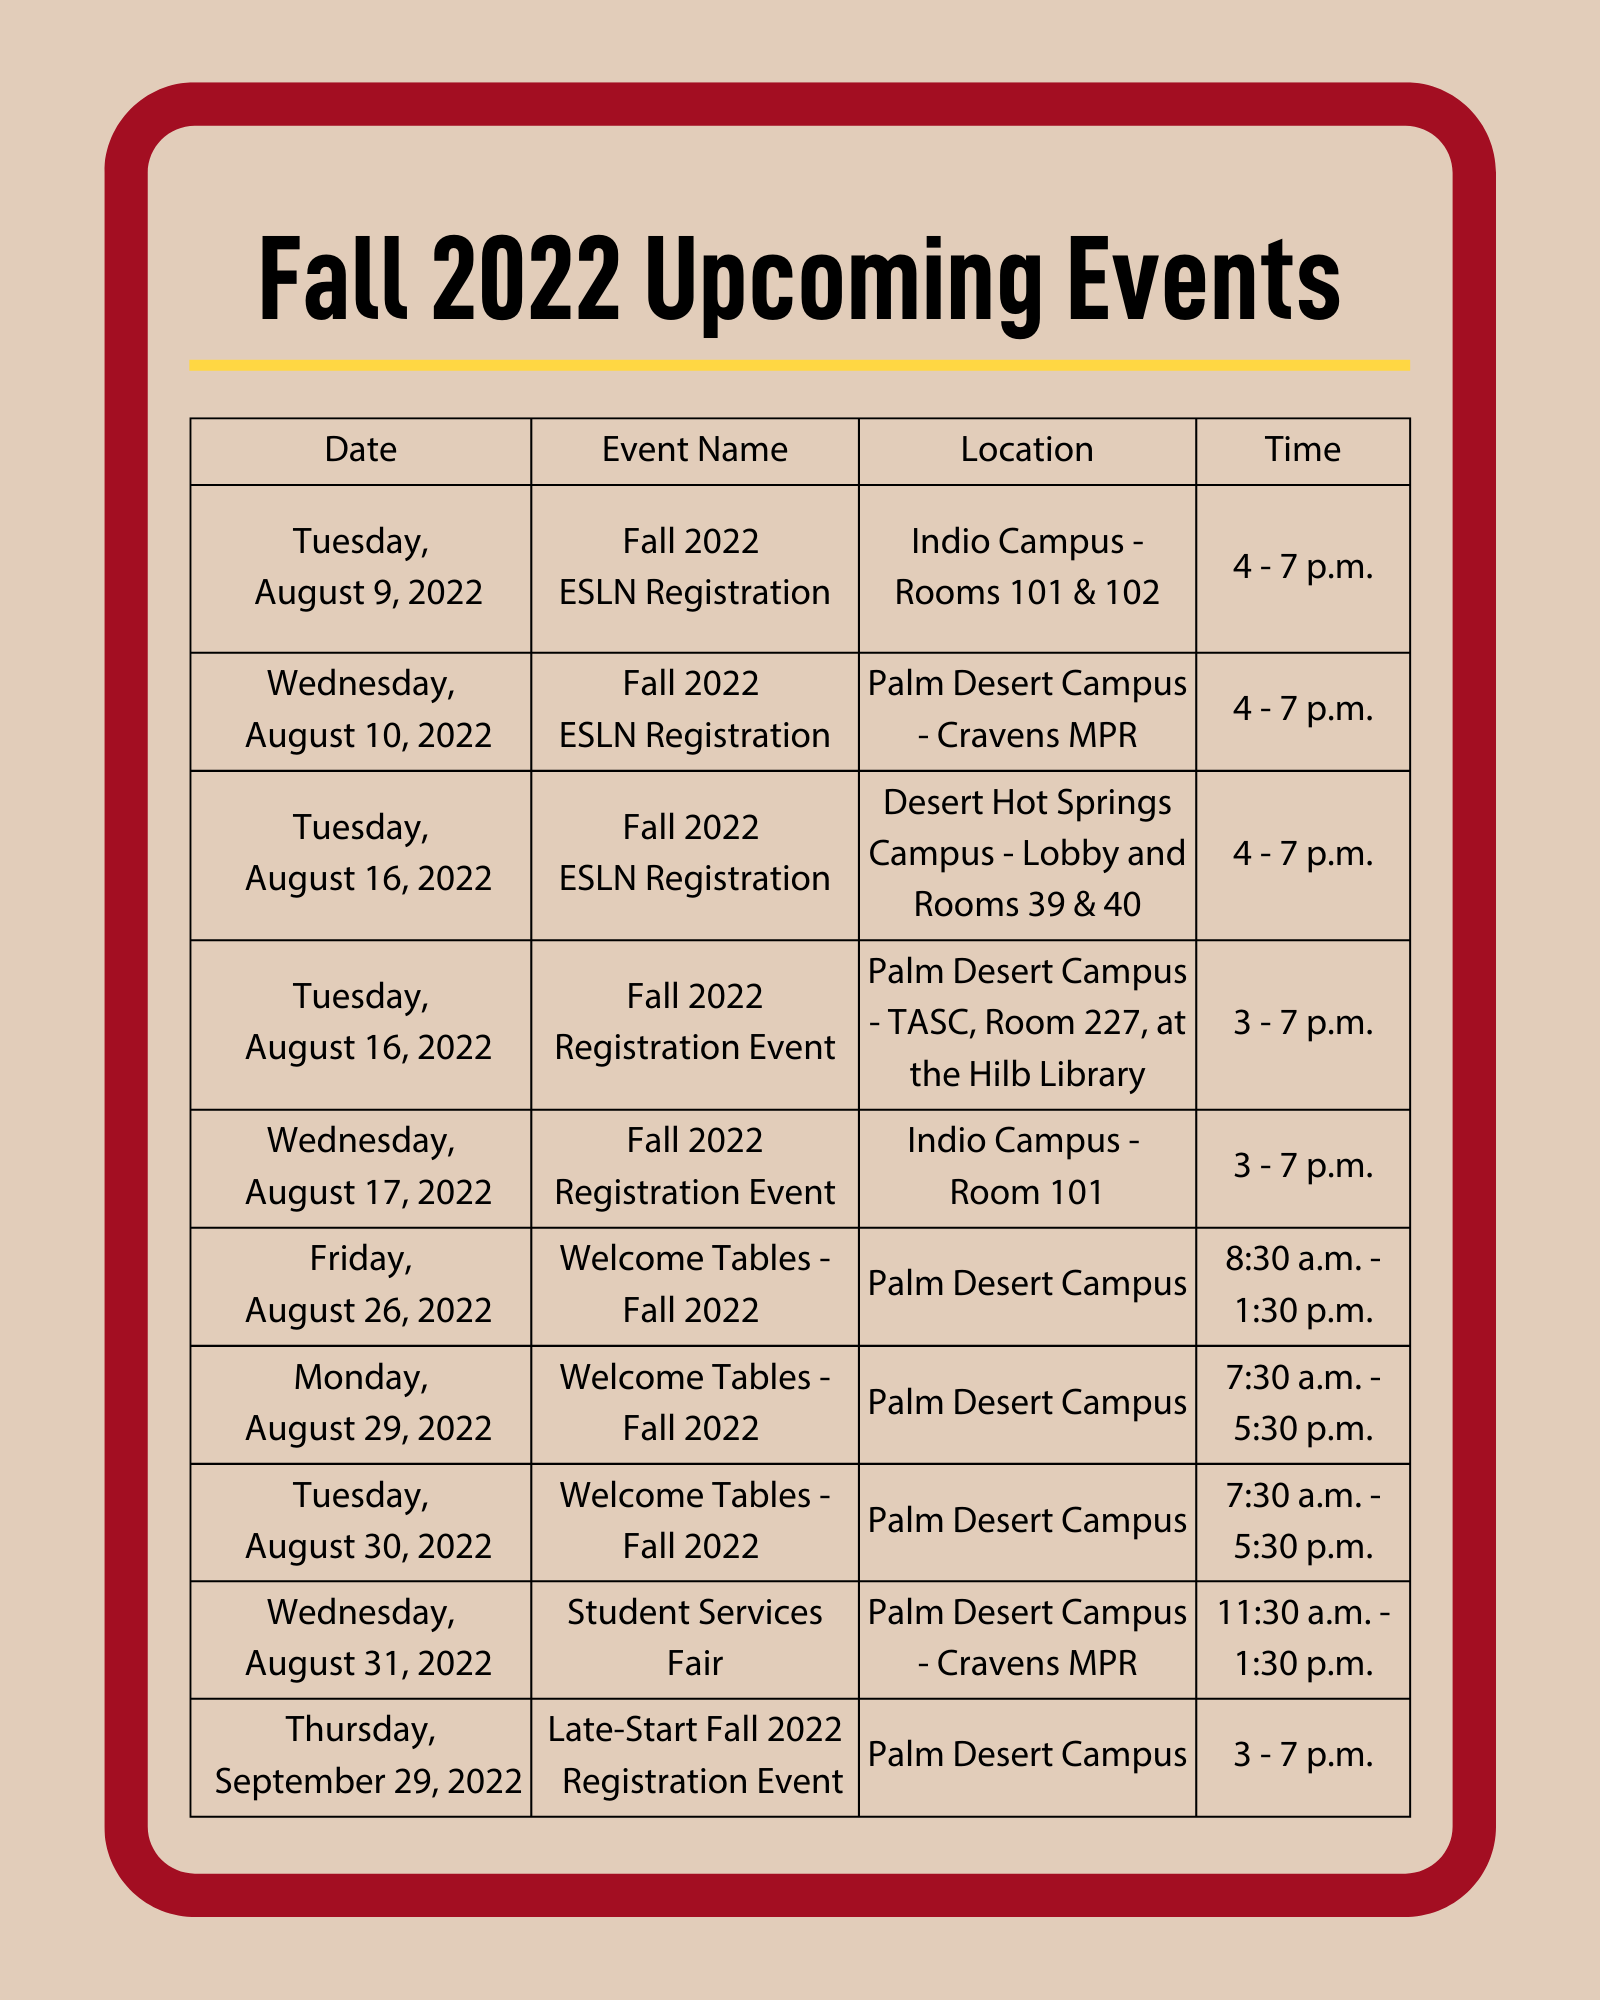 Upcoming Events for Fall 2022